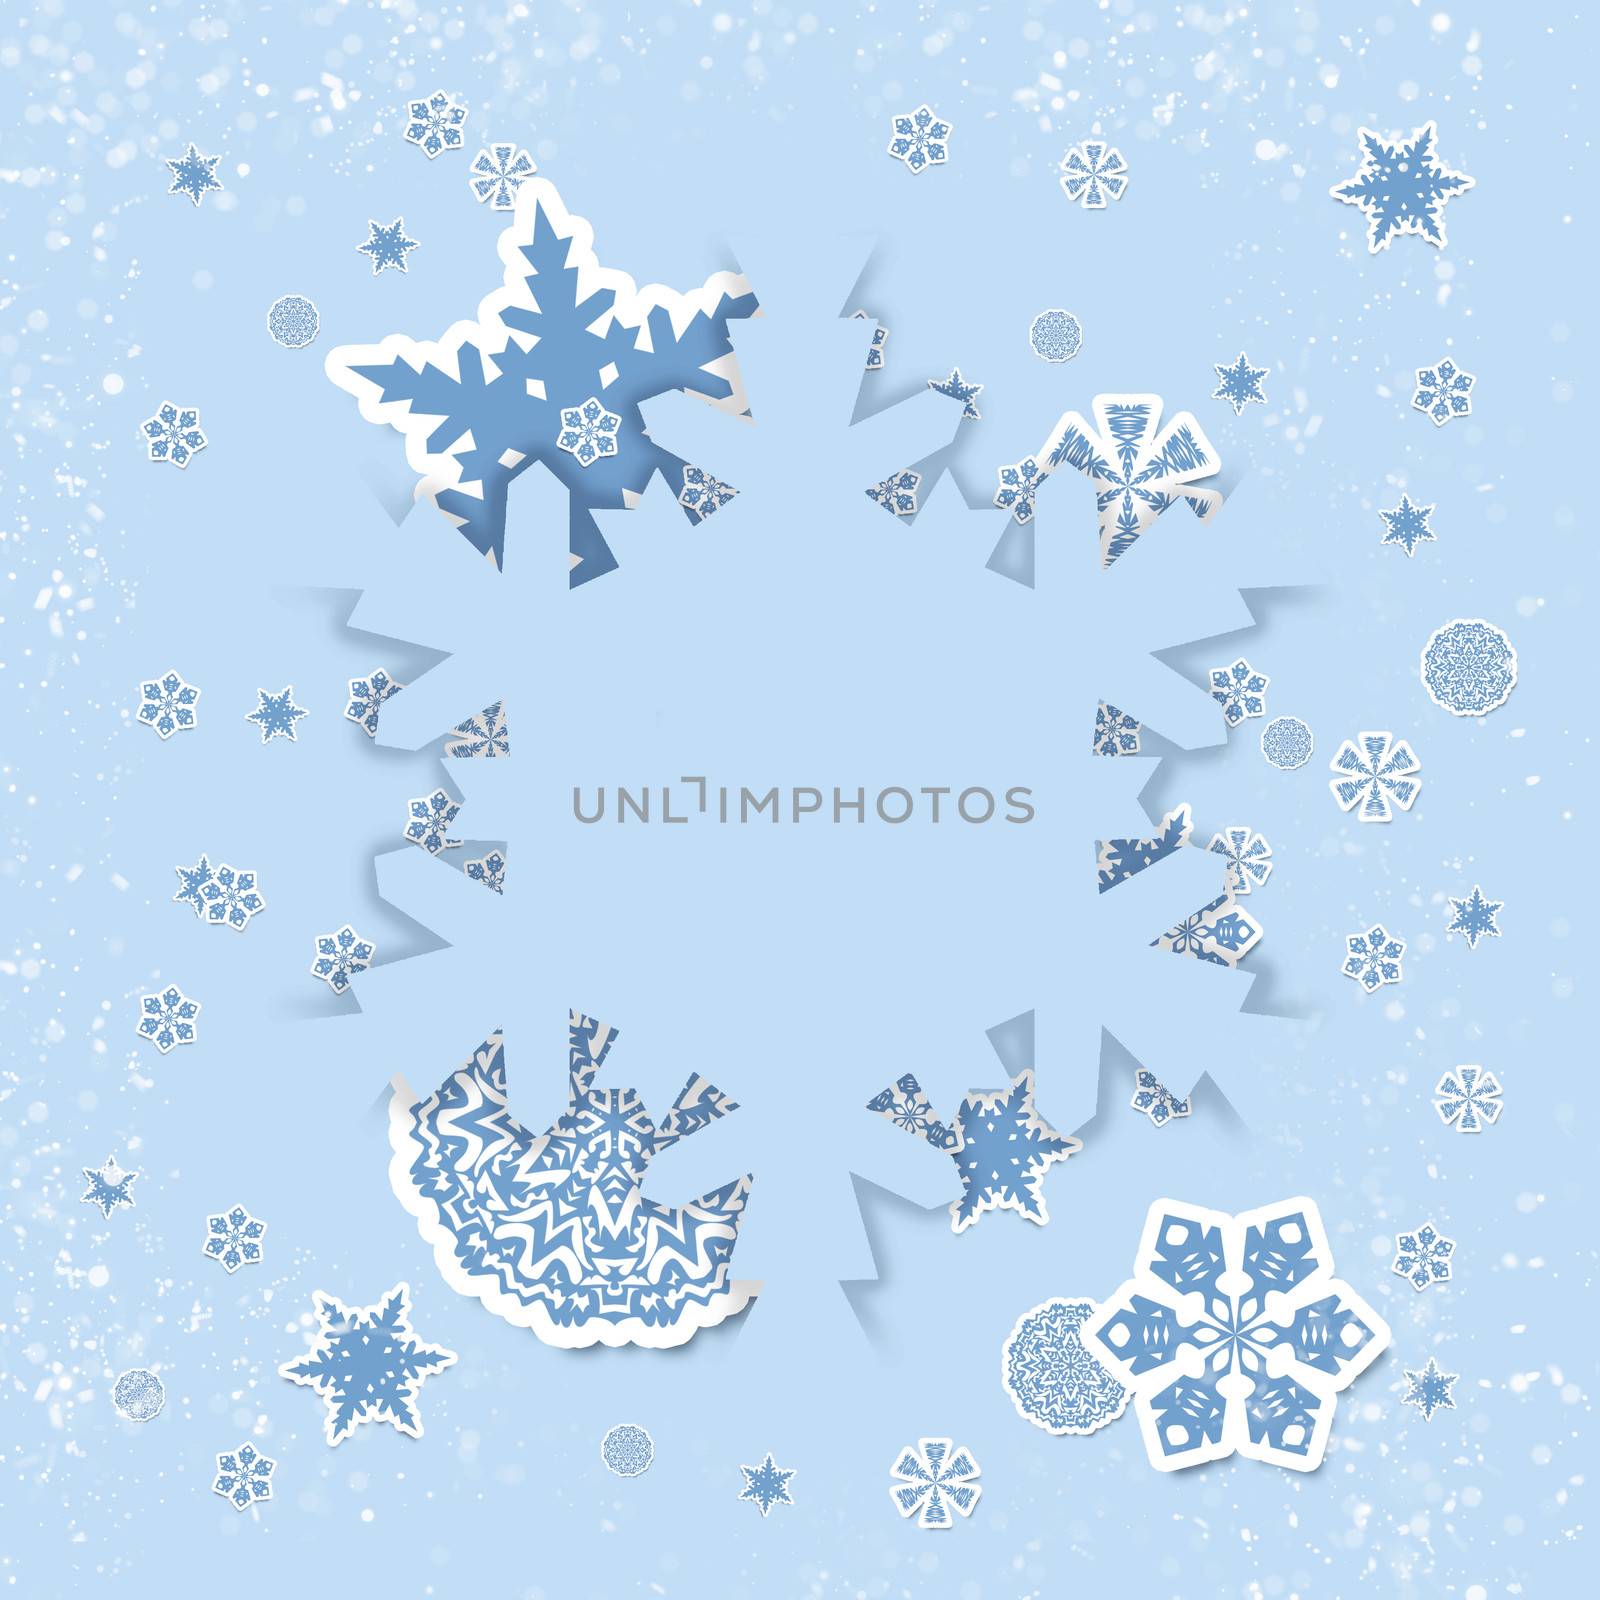 Christmas card. White snowflakes on a blue background